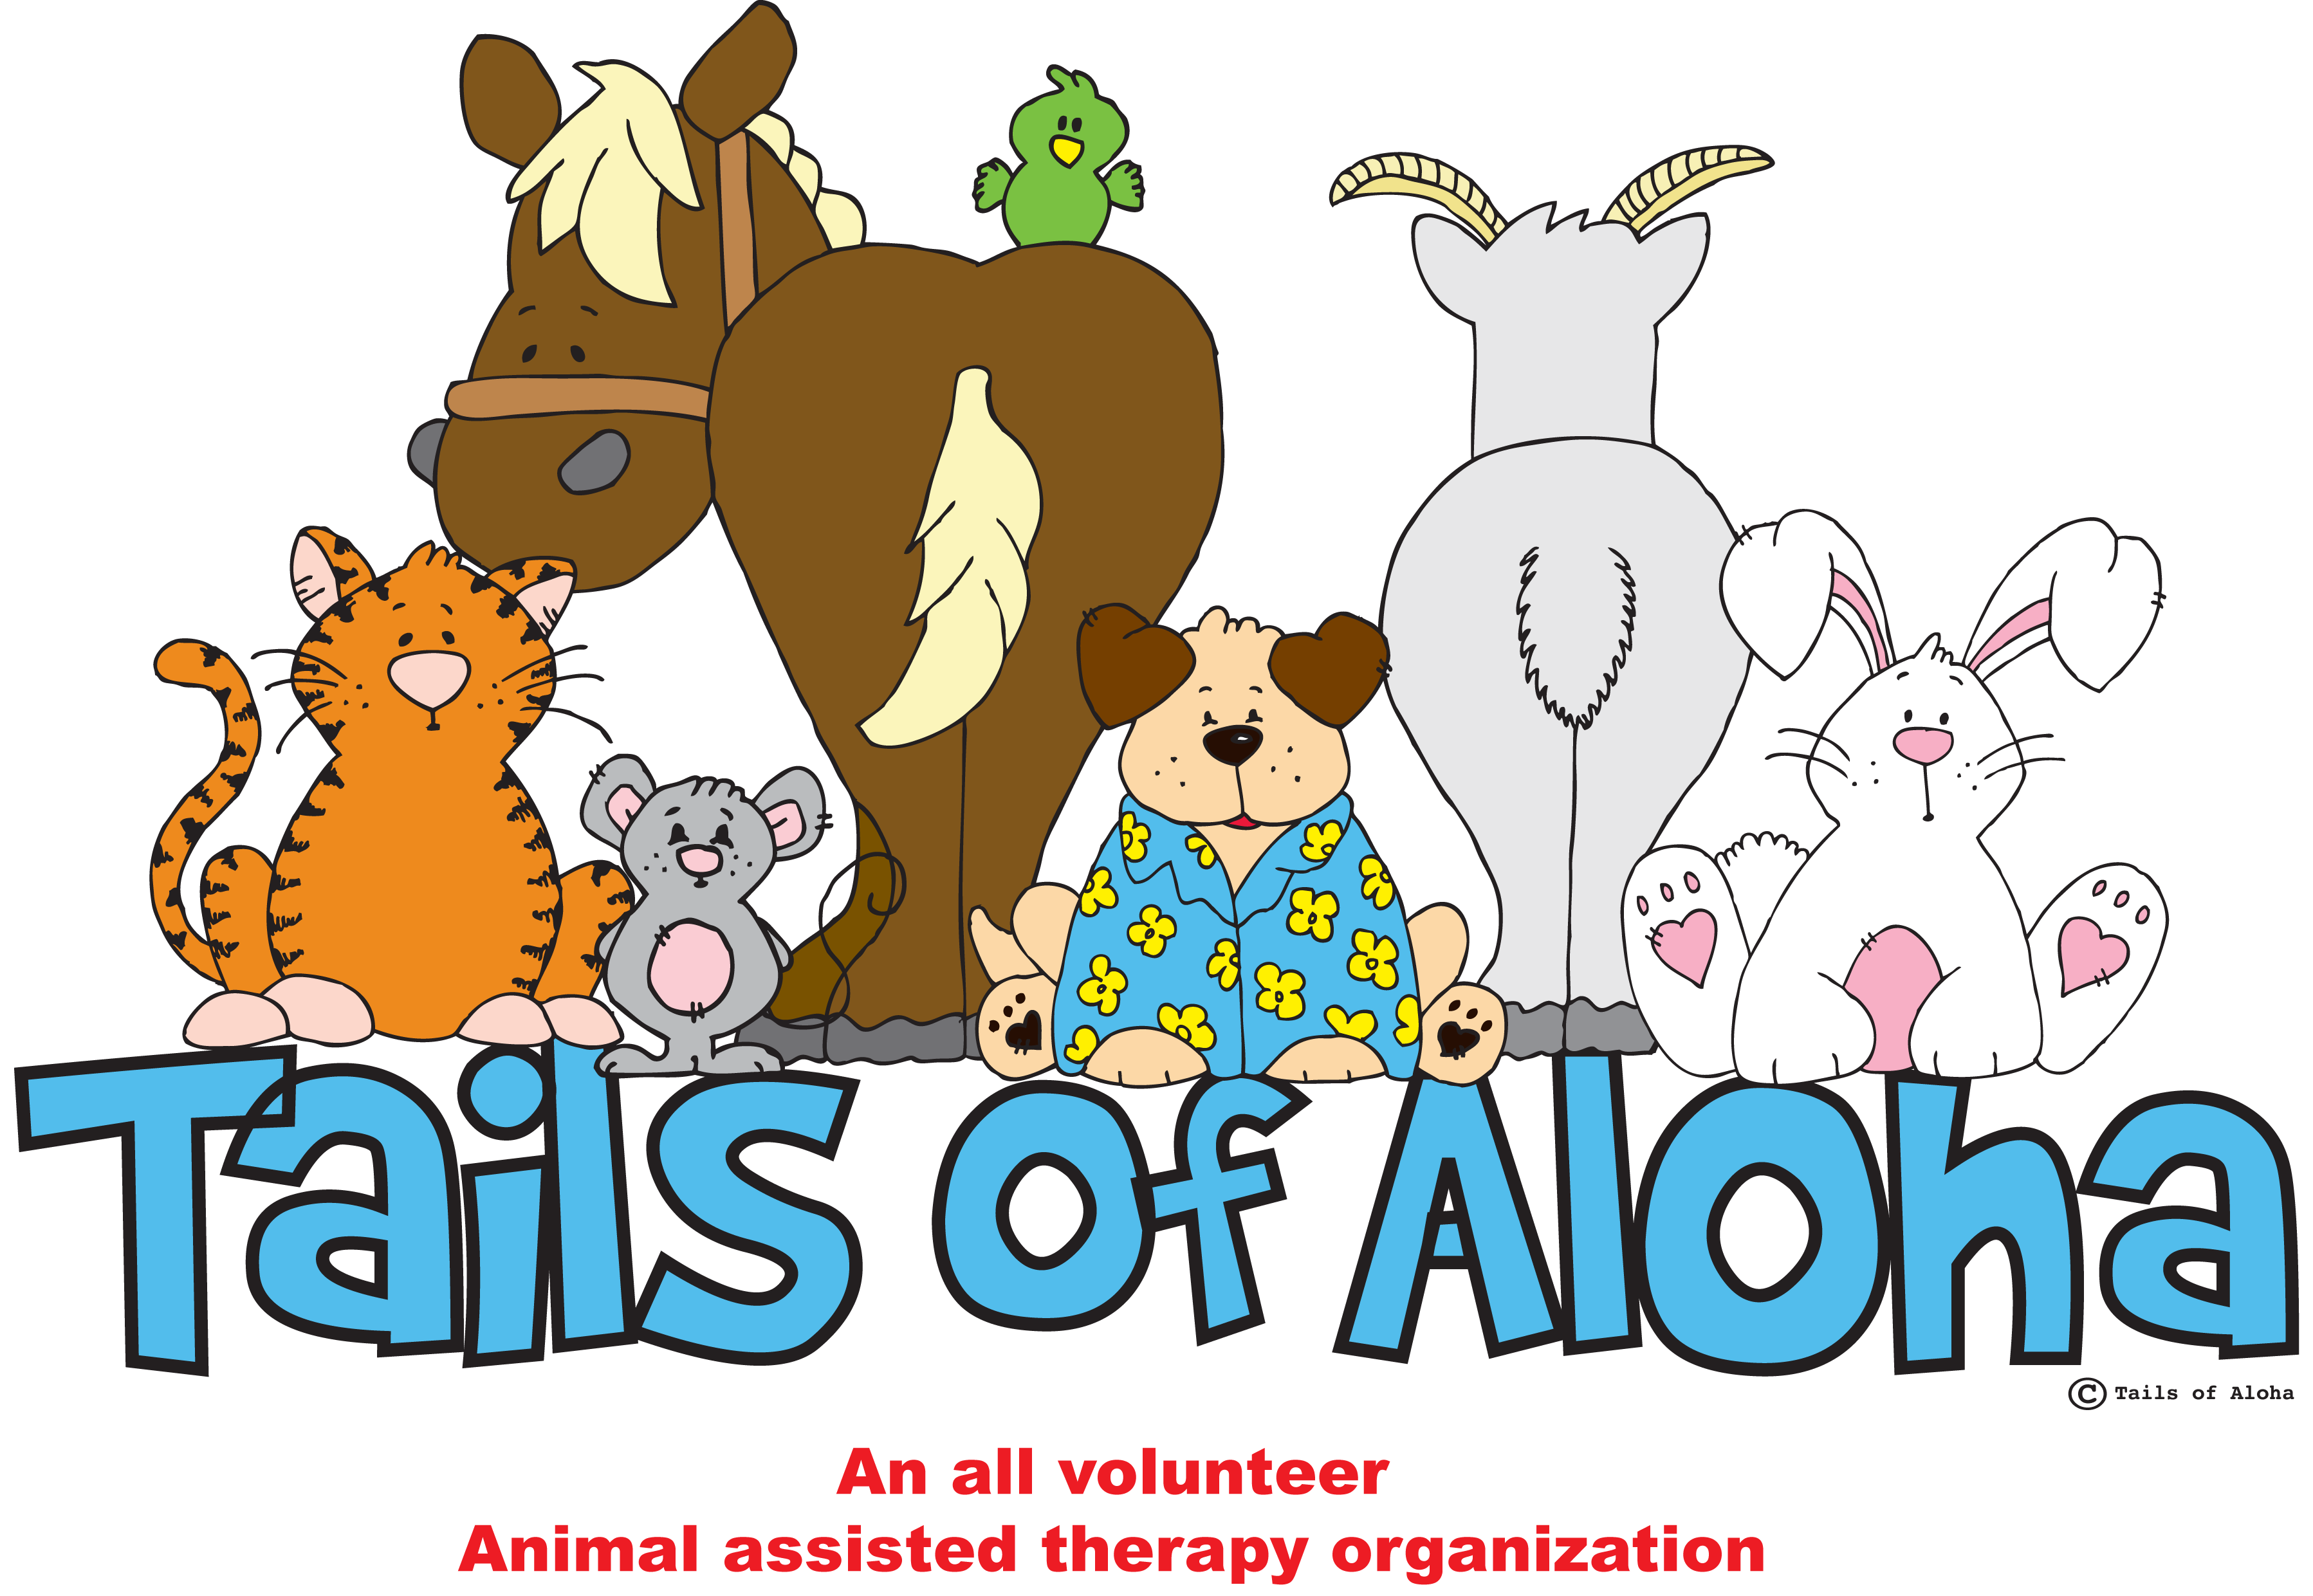 Places we visit tailslogowordpress. Counseling clipart therapeutic recreation